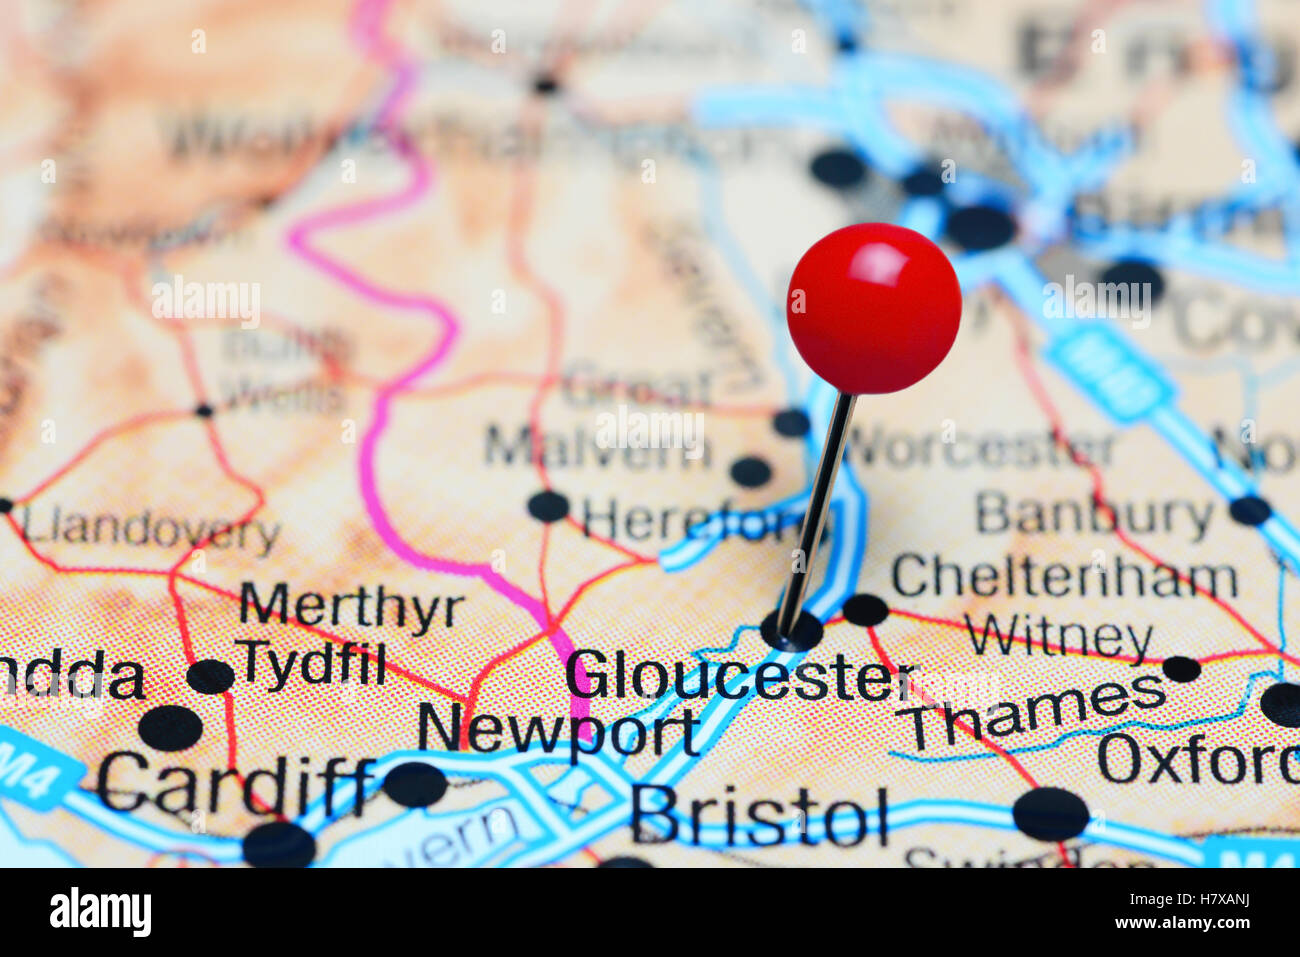 Gloucester pinned on a map of UK Stock Photo